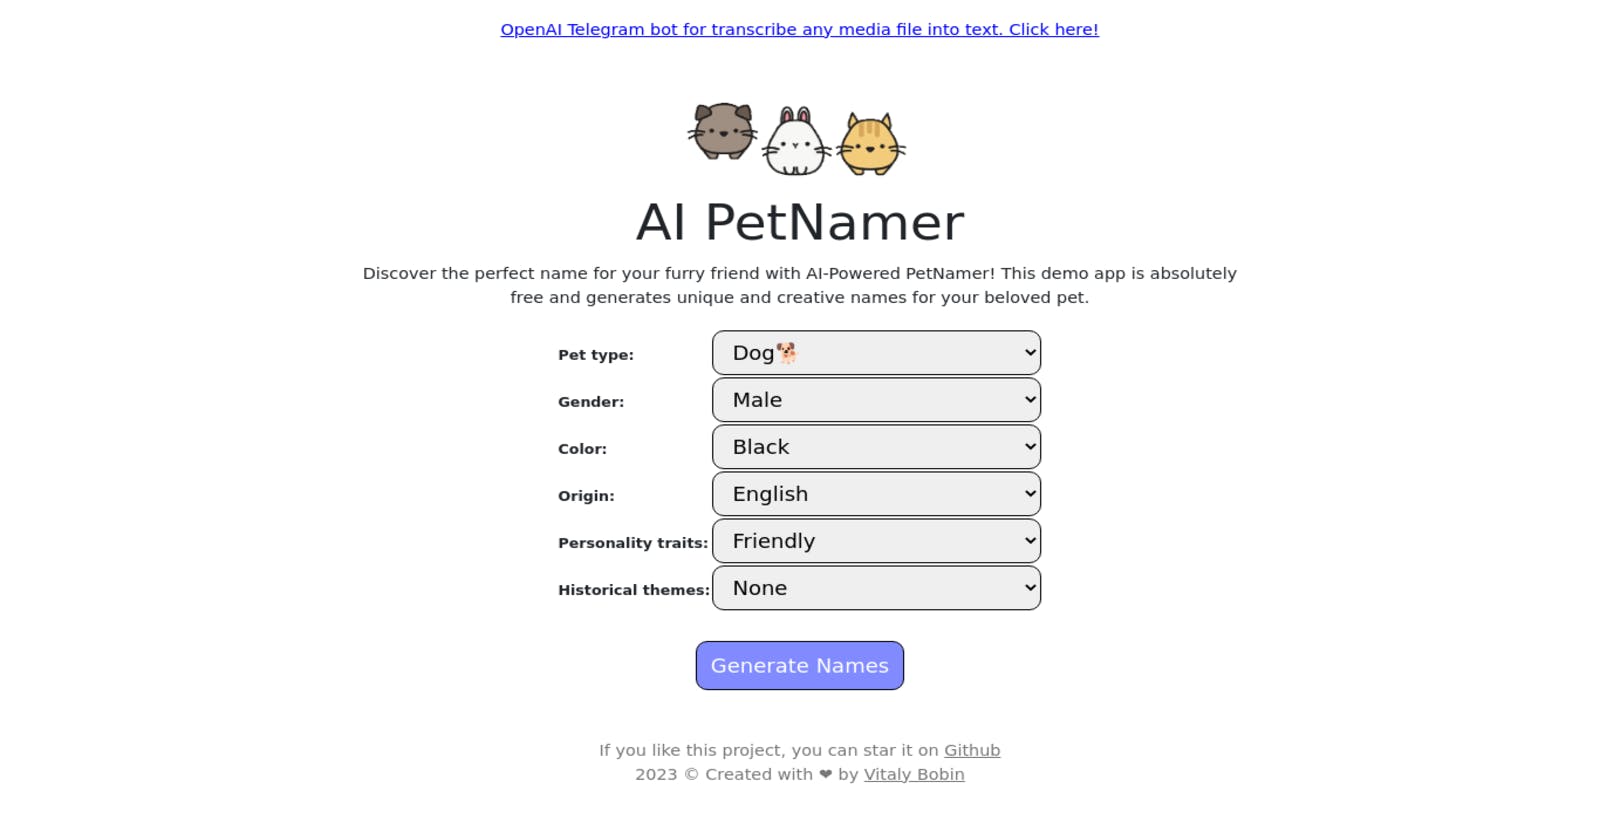 Discover the Perfect Pet Name with AI Pet Name Generator